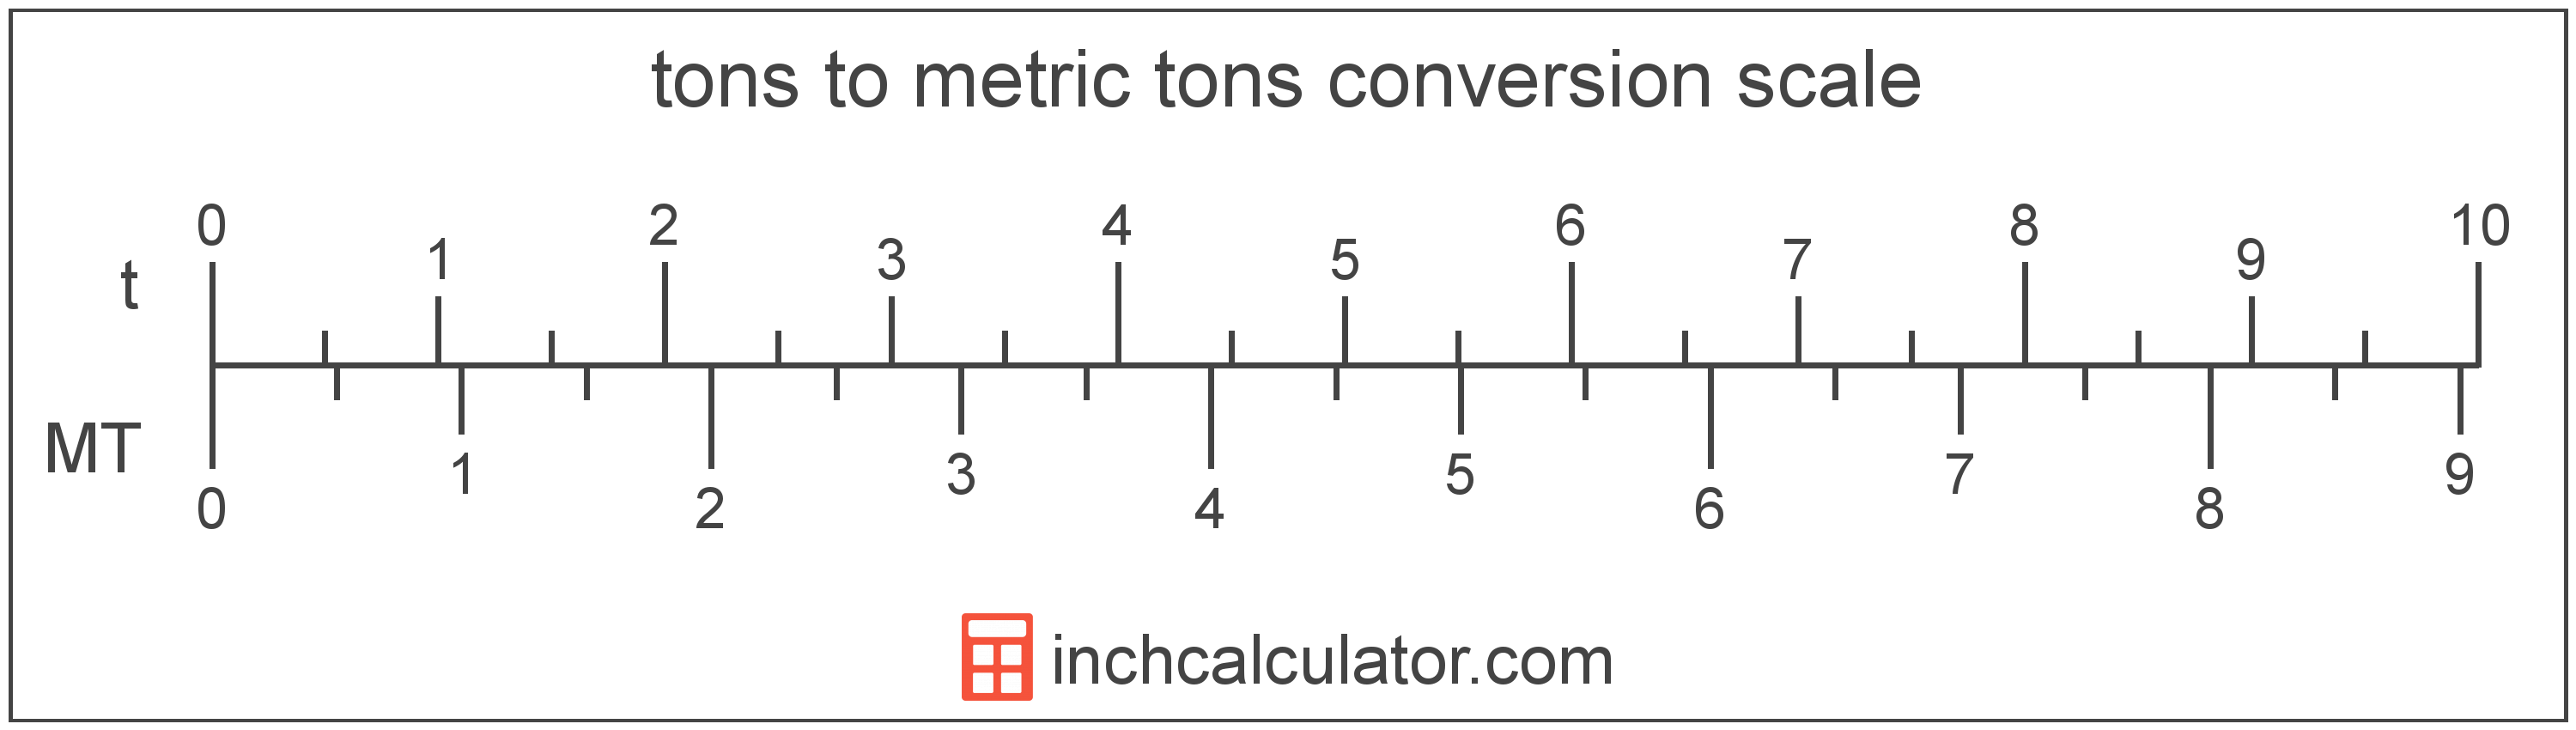 tons to lbs conversion chart